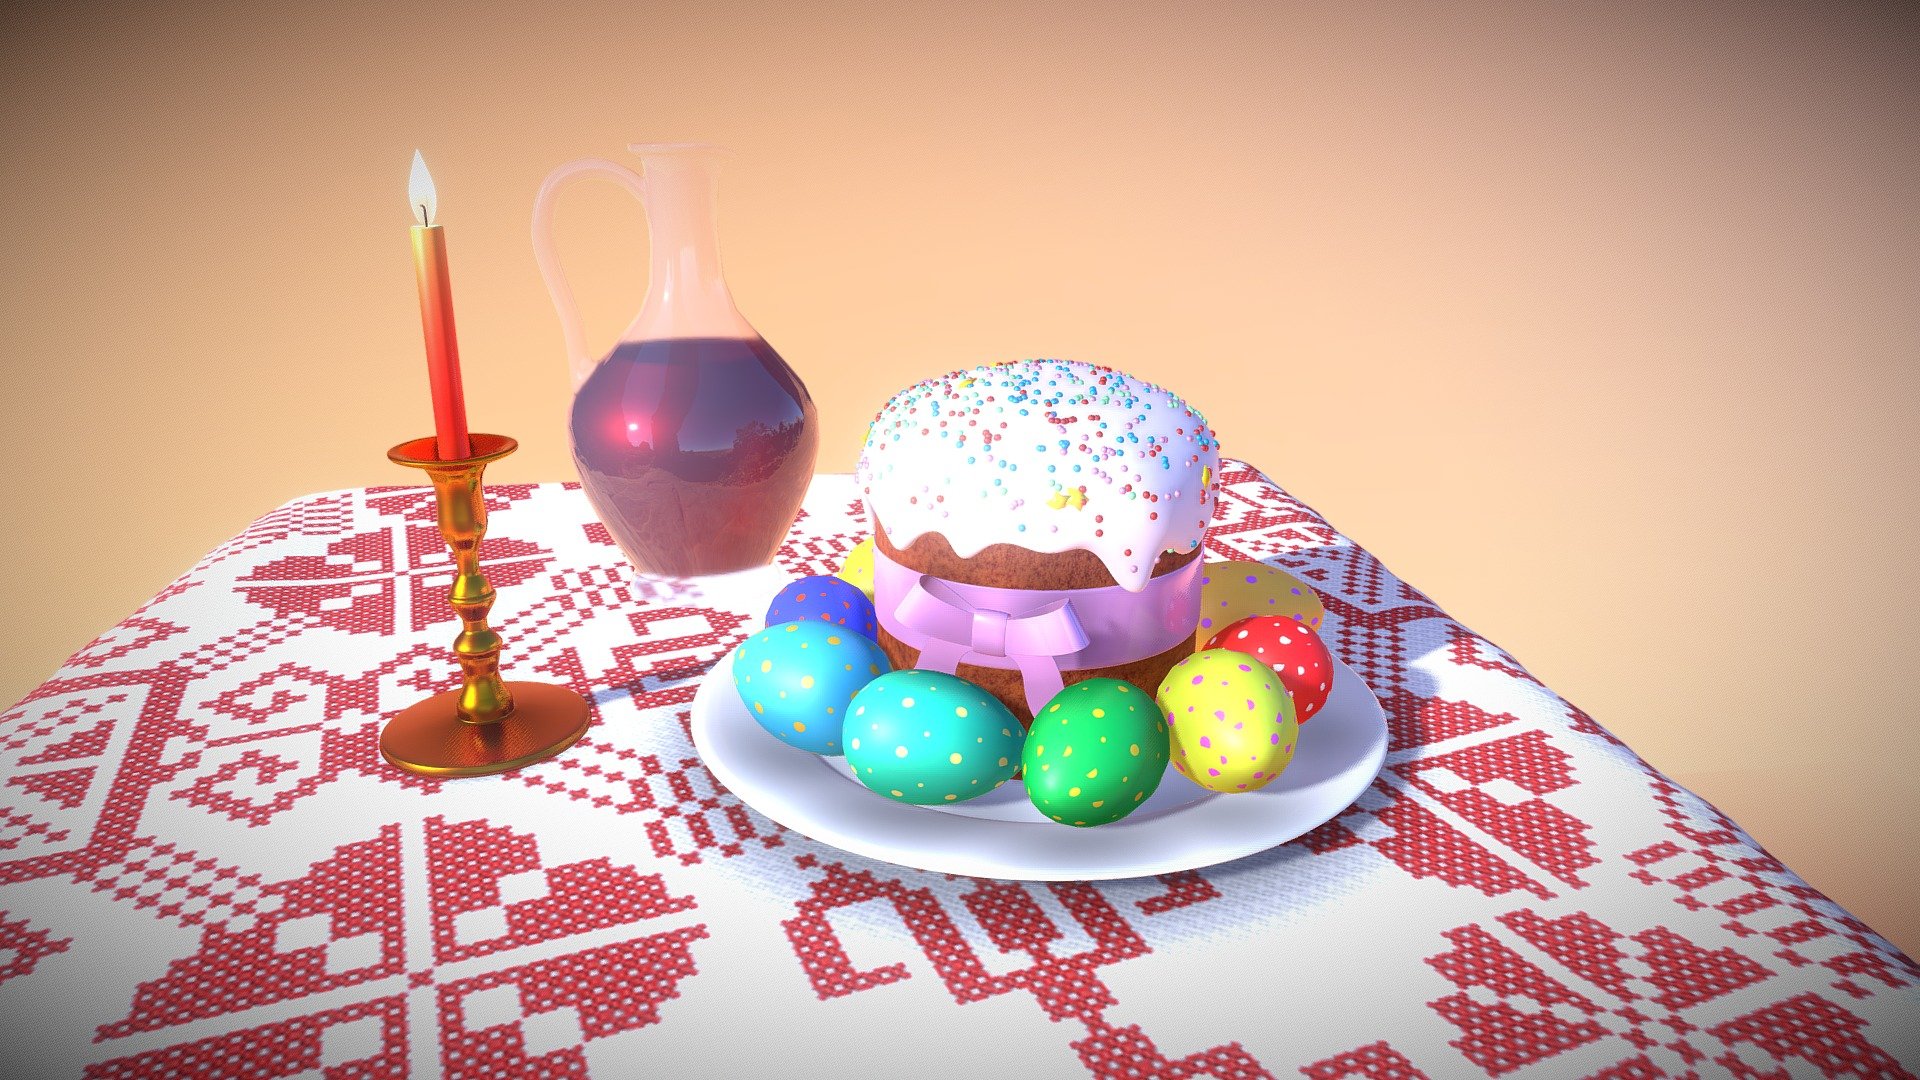 This is a part of our giftcvard scene made for last Easter. This Table and objects on it is main and central parto of a scene. We drove our knowlage from last several project to create mostly realistic scene. But the limitation of this web engine a still present, so I decided to optimize the topology of a model to be more accepatable here, and also seperated my scene to several parts. This part is most imortant, becasu it's in camera focus. The whole scene as a render avalable here: https://www.deviantart.com/kuro4ka13/art/Easter-cake-and-Cherry-878304721 - Easter cake - 3D model by Moora 3d model